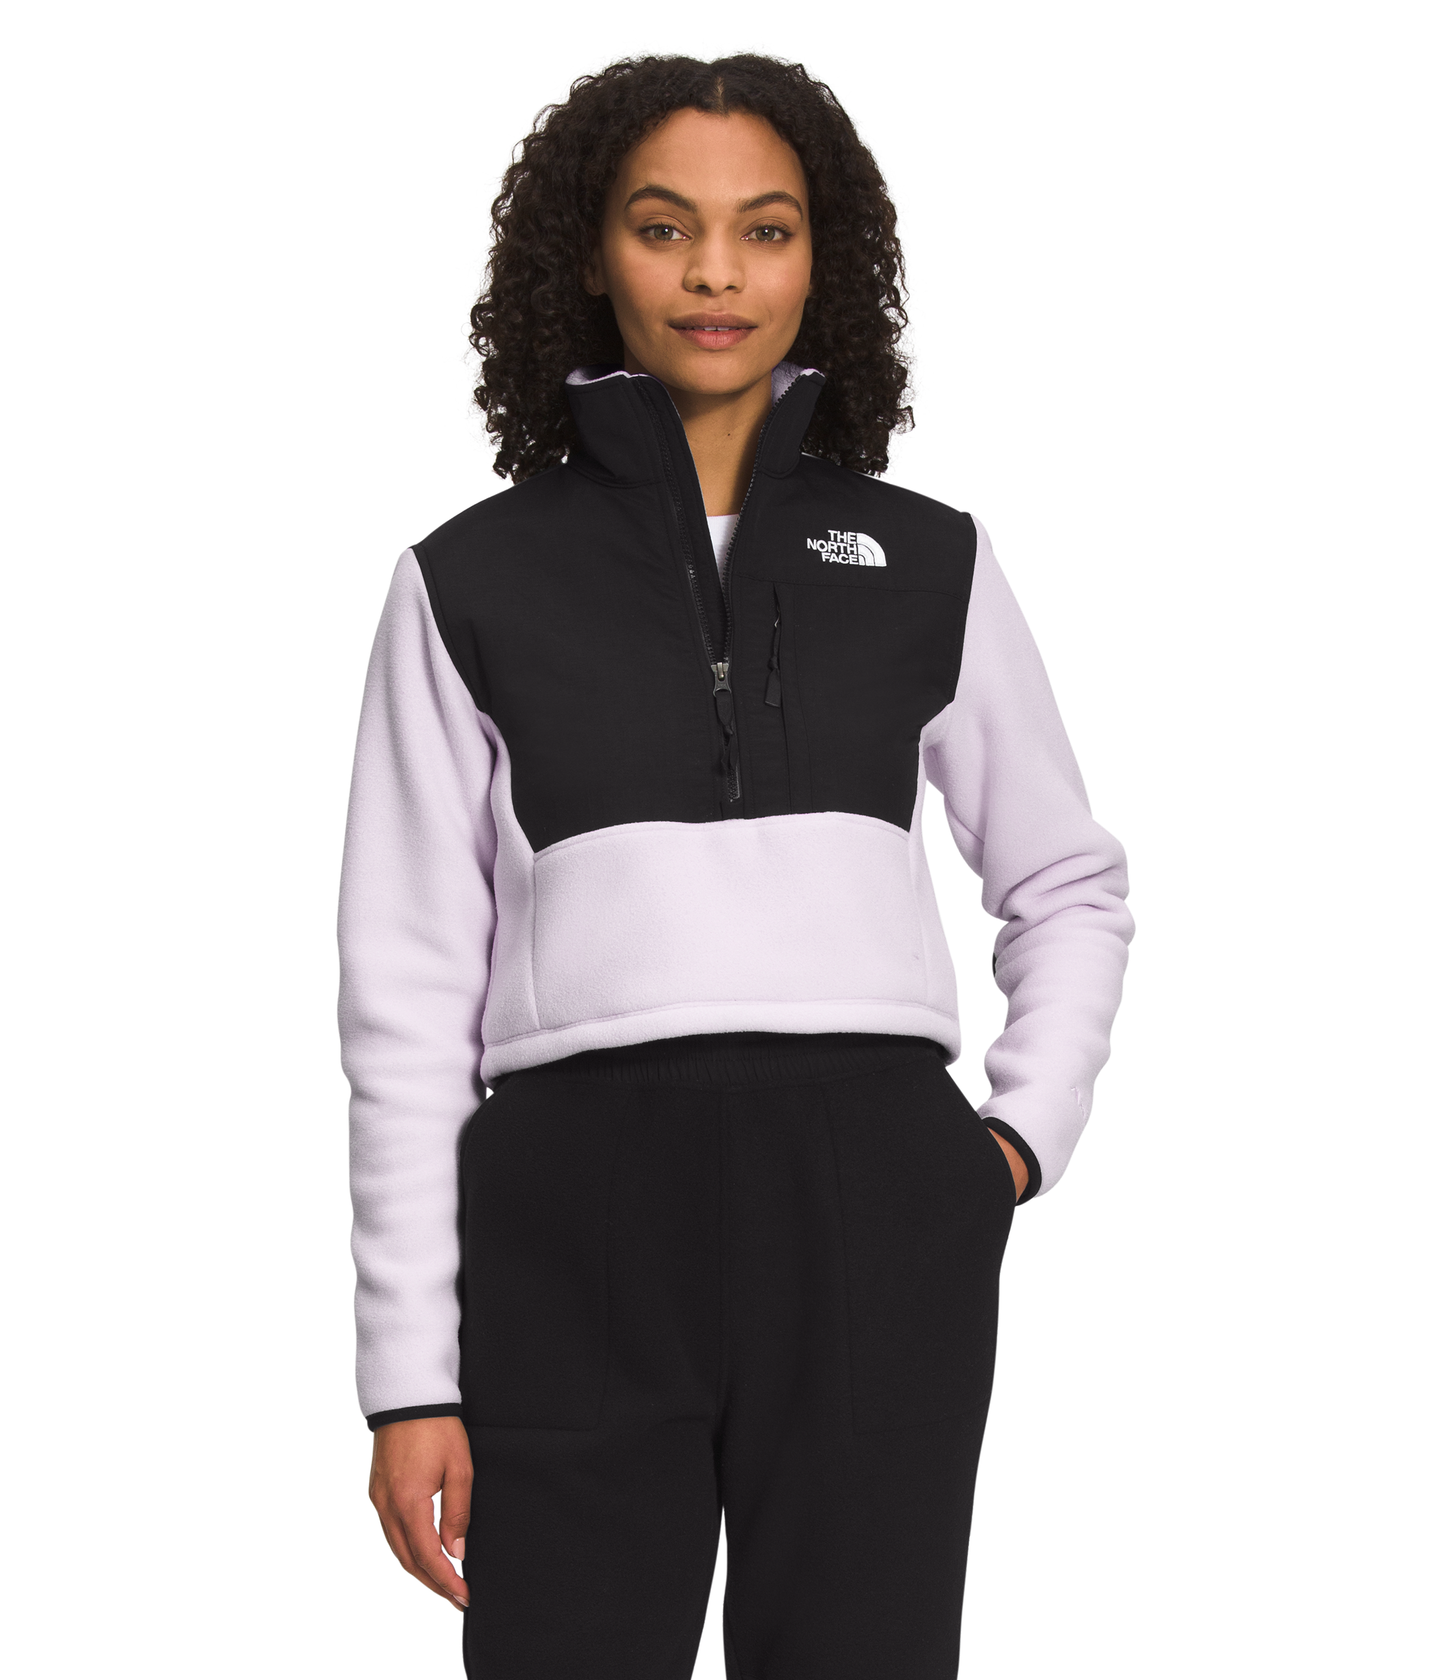 The North Face Women's Denali Fleece Cropped Jacket in Black The North Face